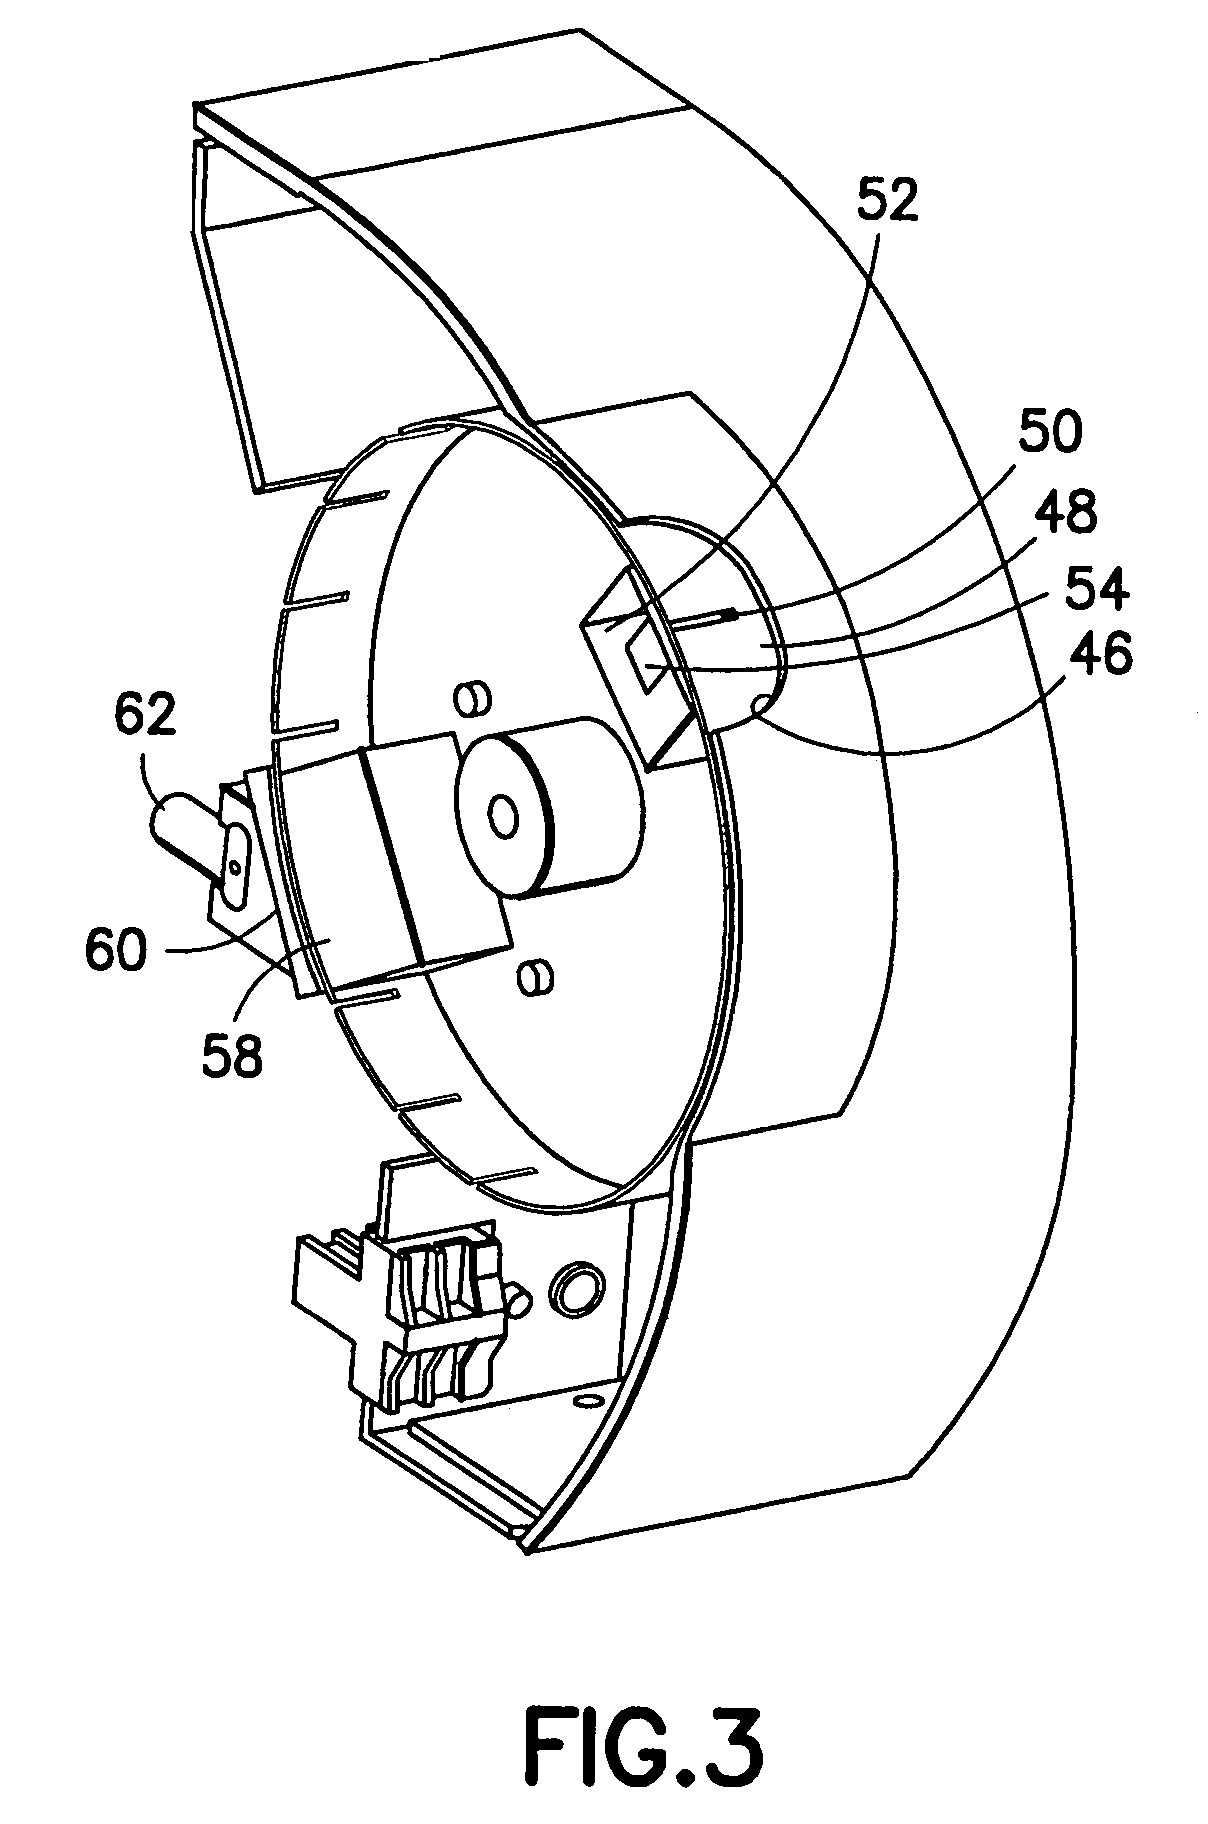 Calibration and verification tool and method for calibrating a detection apparatus